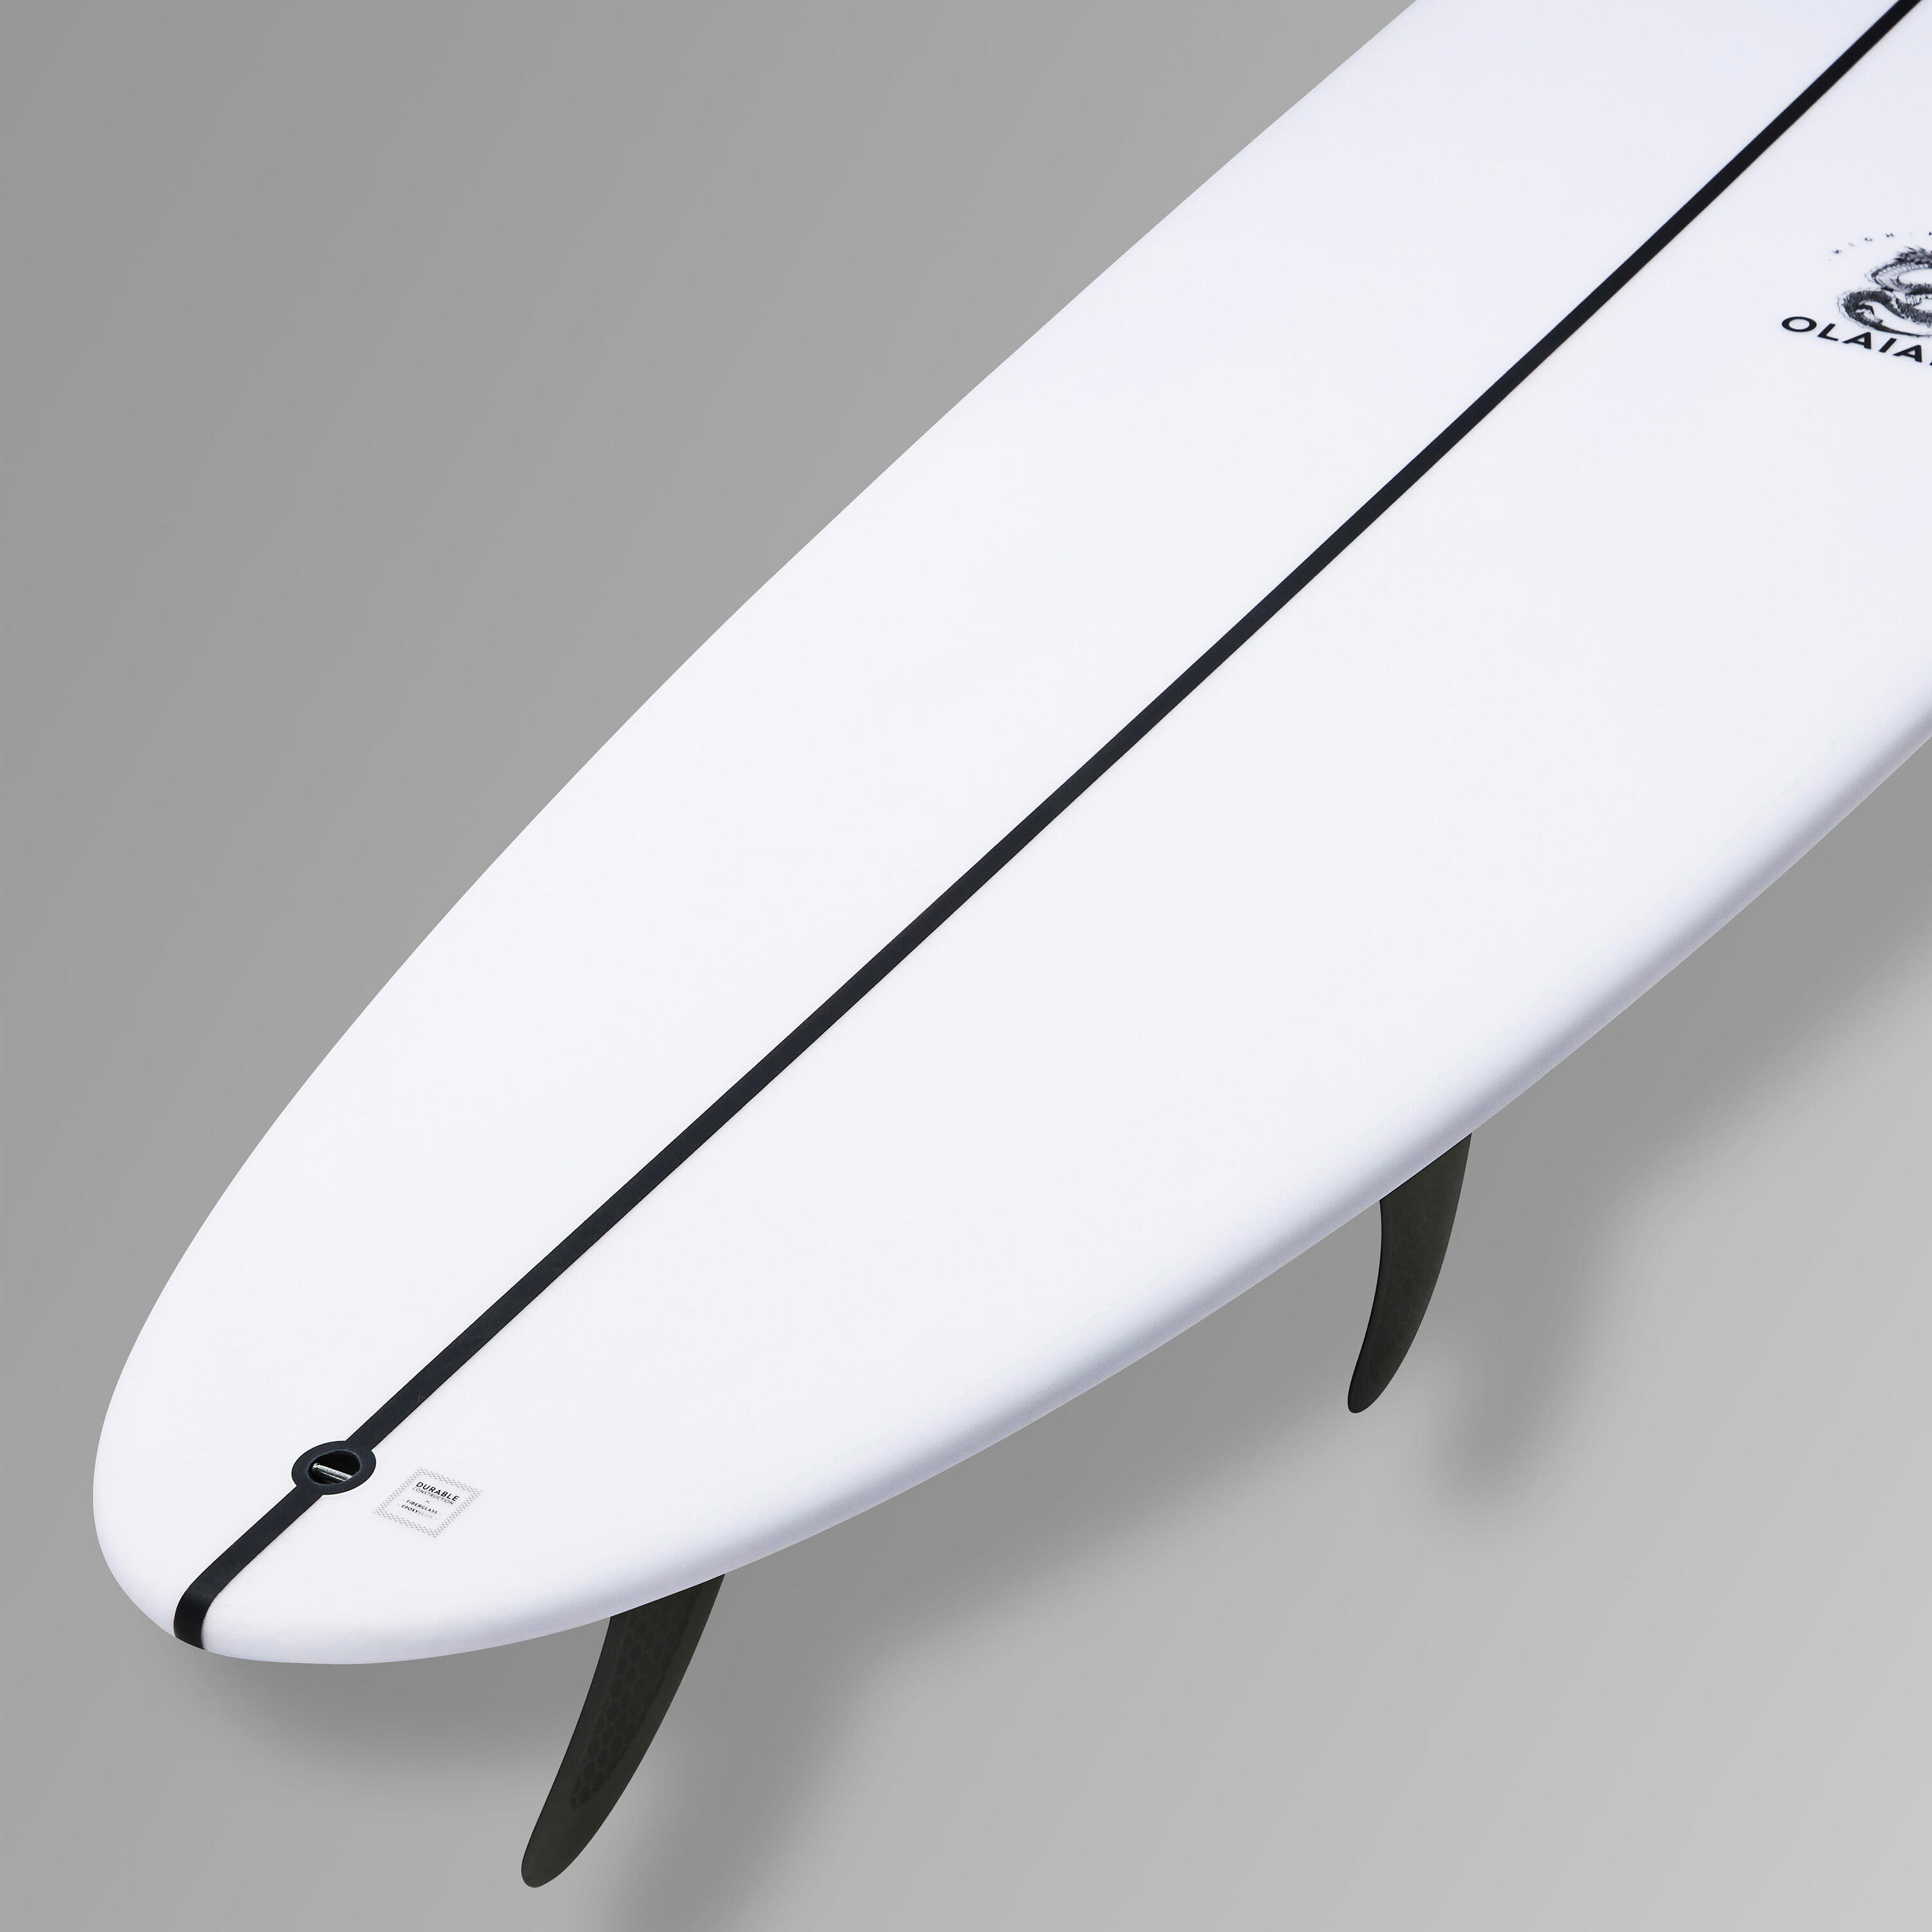 LONGBOARD 900 9' Performance 60 L. Comes with 2+1 setup 8" central fin. 8/14